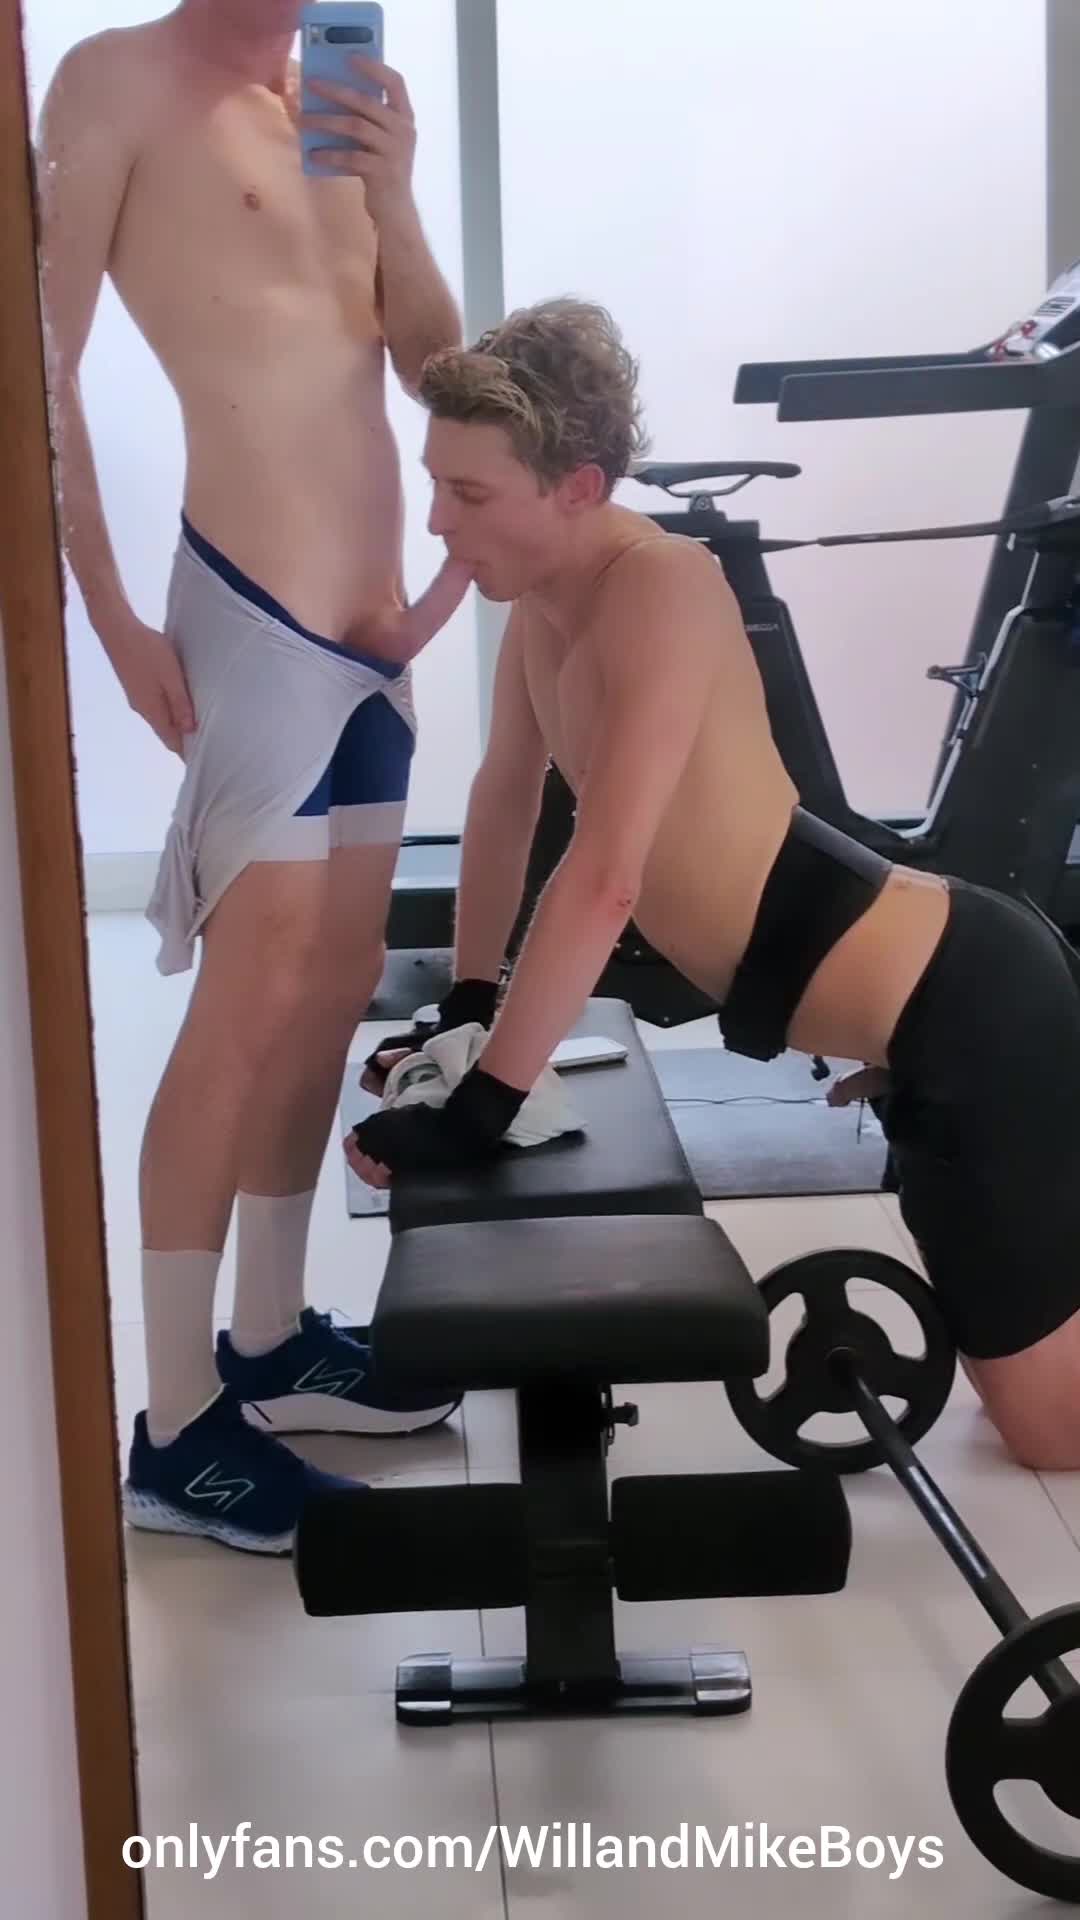 Young gay cyclist sucked by a friend at the gym [Onlyfans]